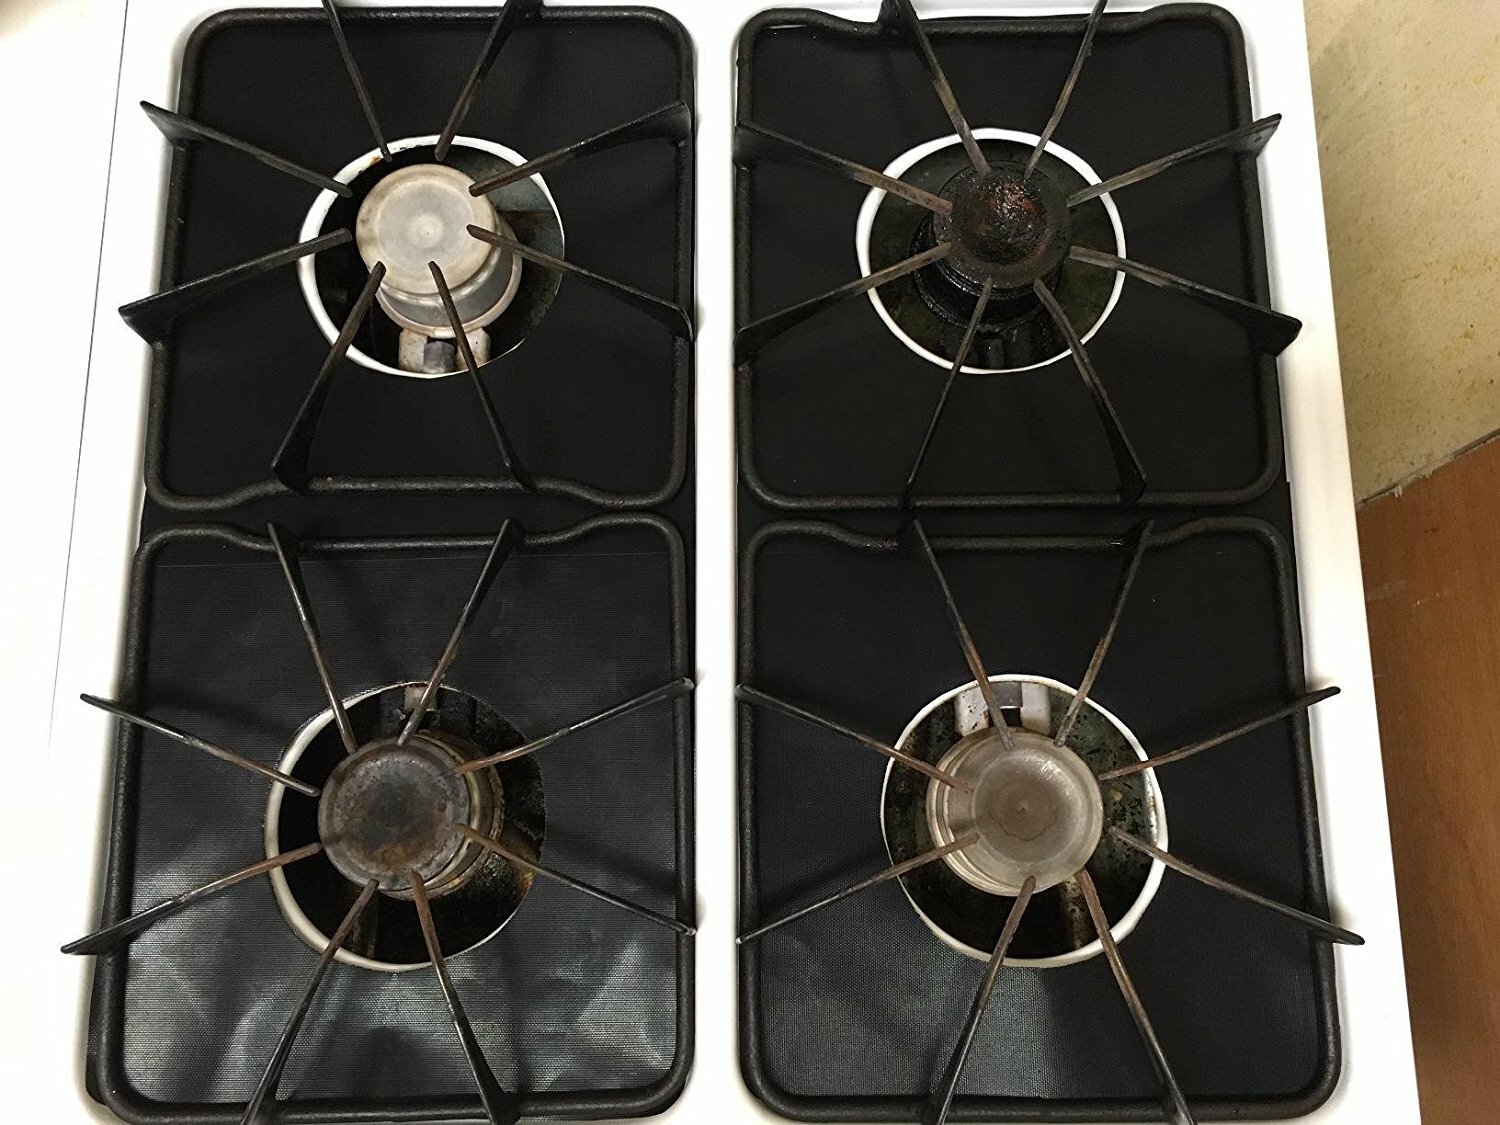 Stove Burner Covers Stainless Steel Rectangular Gas Top Kitchen Decor Set Of 2 